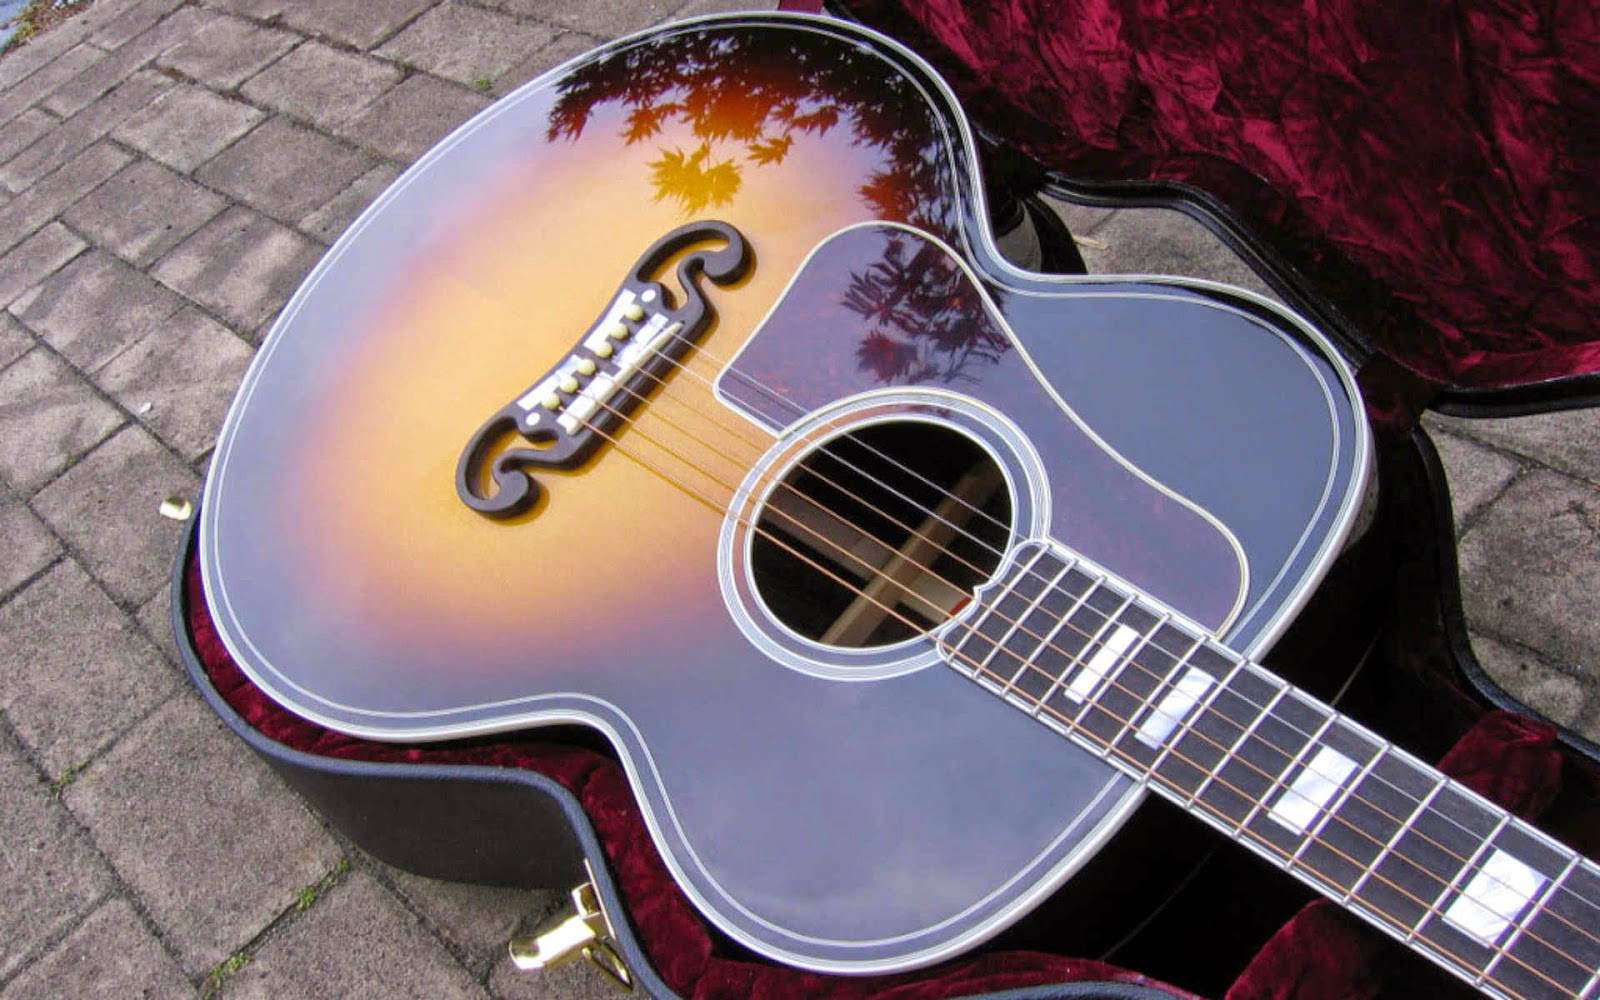 A glossy acoustic guitar, perfect for strumming your best melodies. Wallpaper